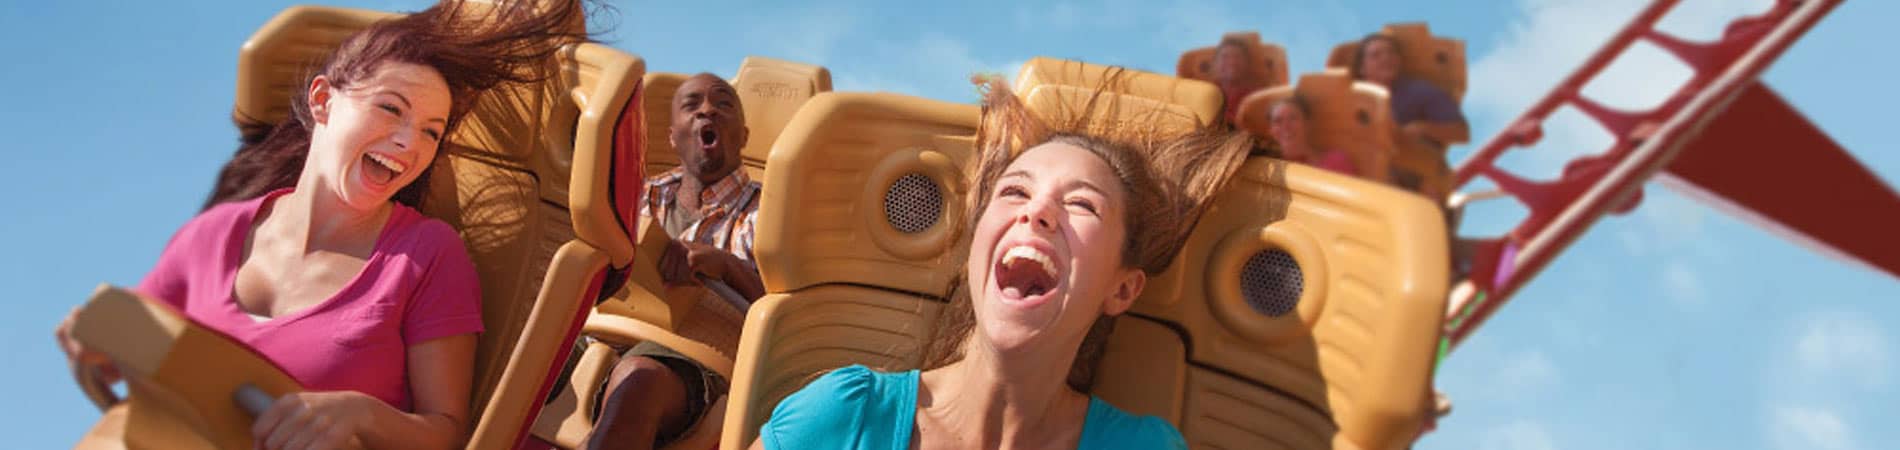 universal studios vacation packages cheap